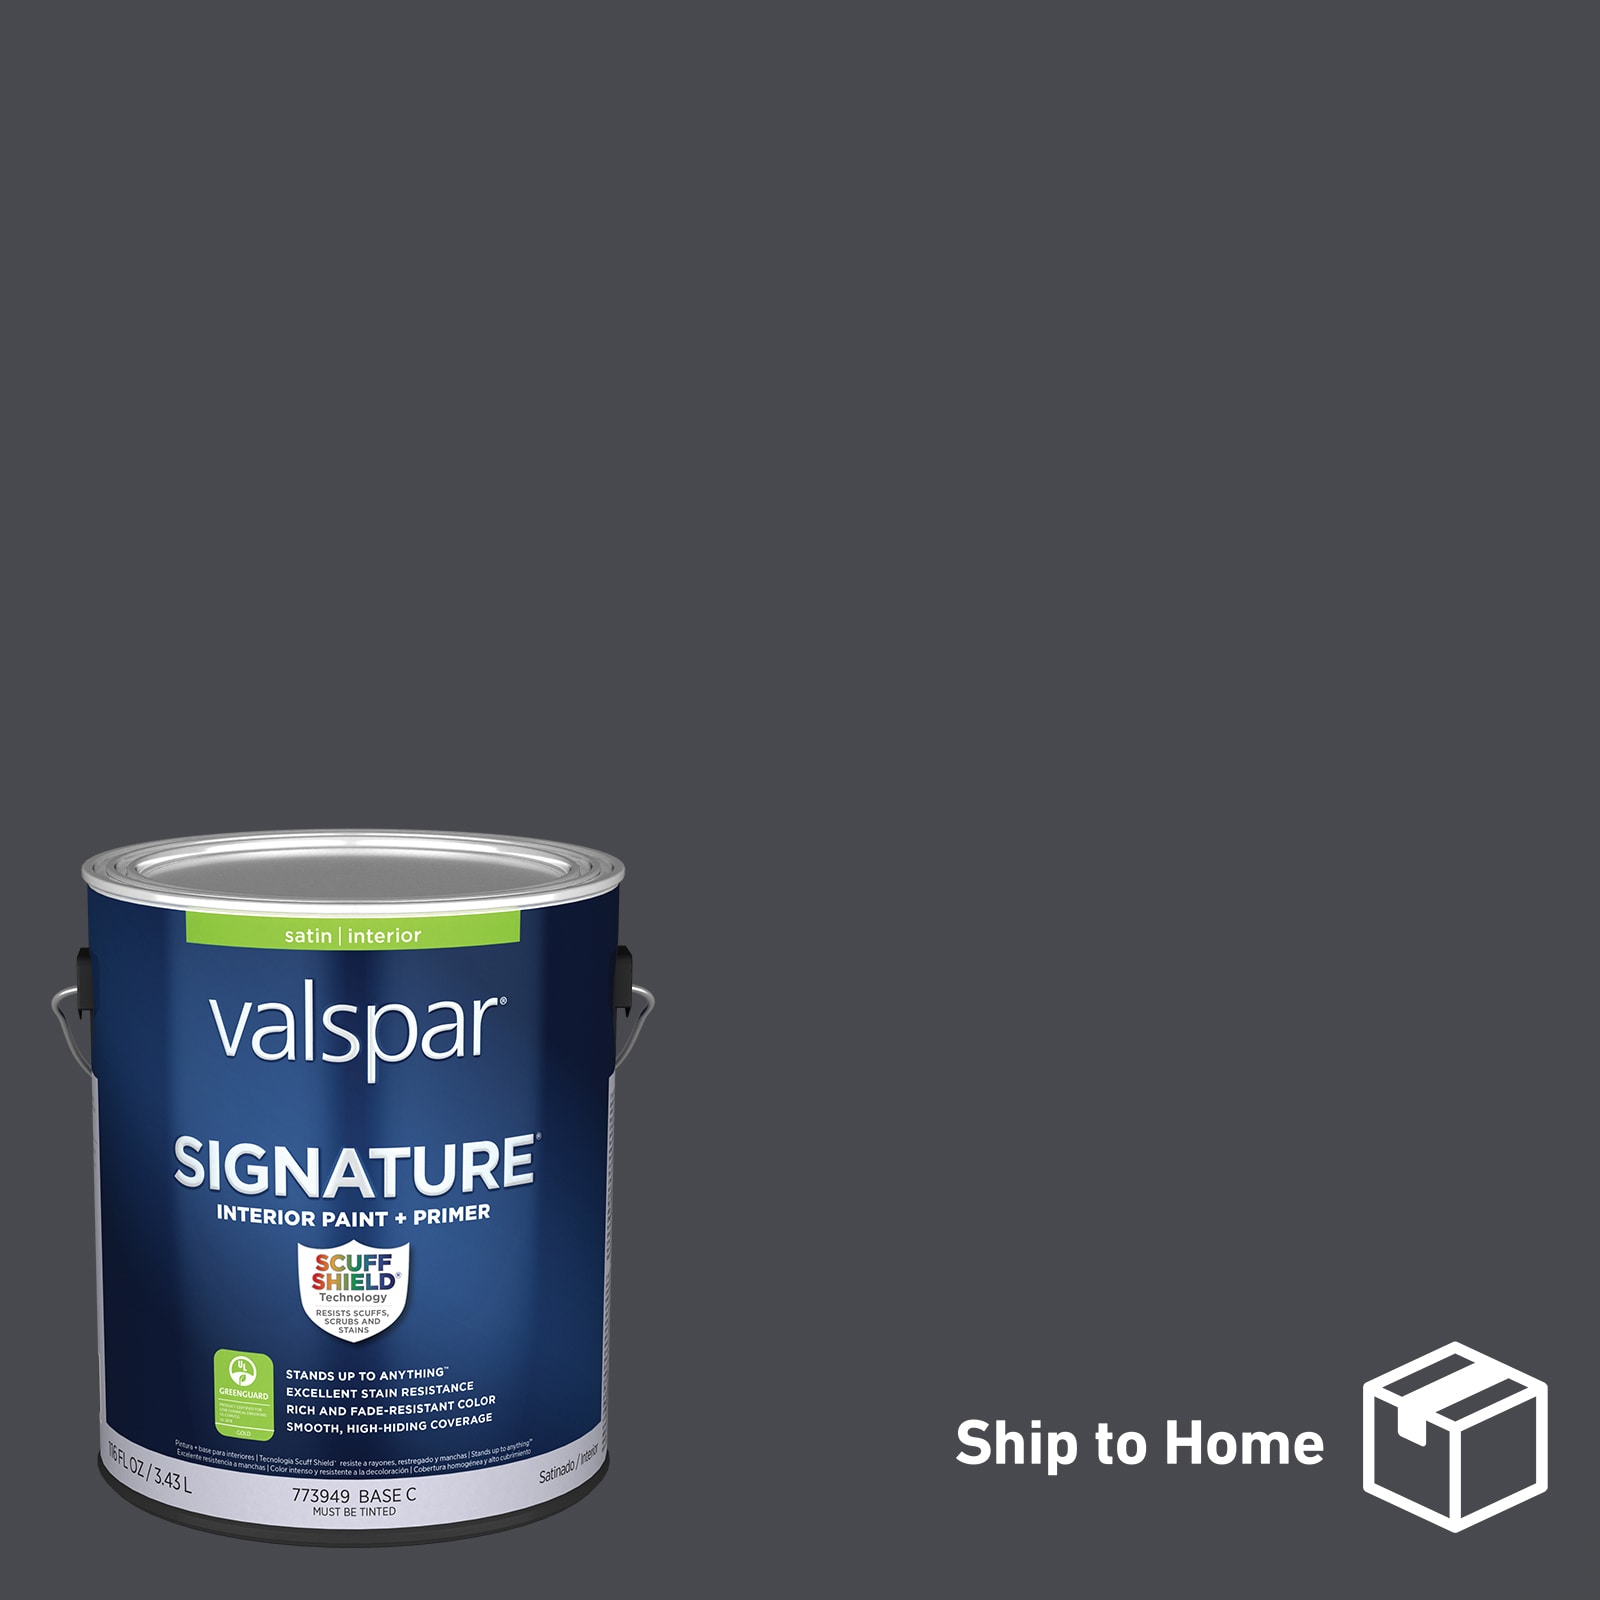 Valspar 92-19B Violet Dust Precisely Matched For Paint and Spray Paint